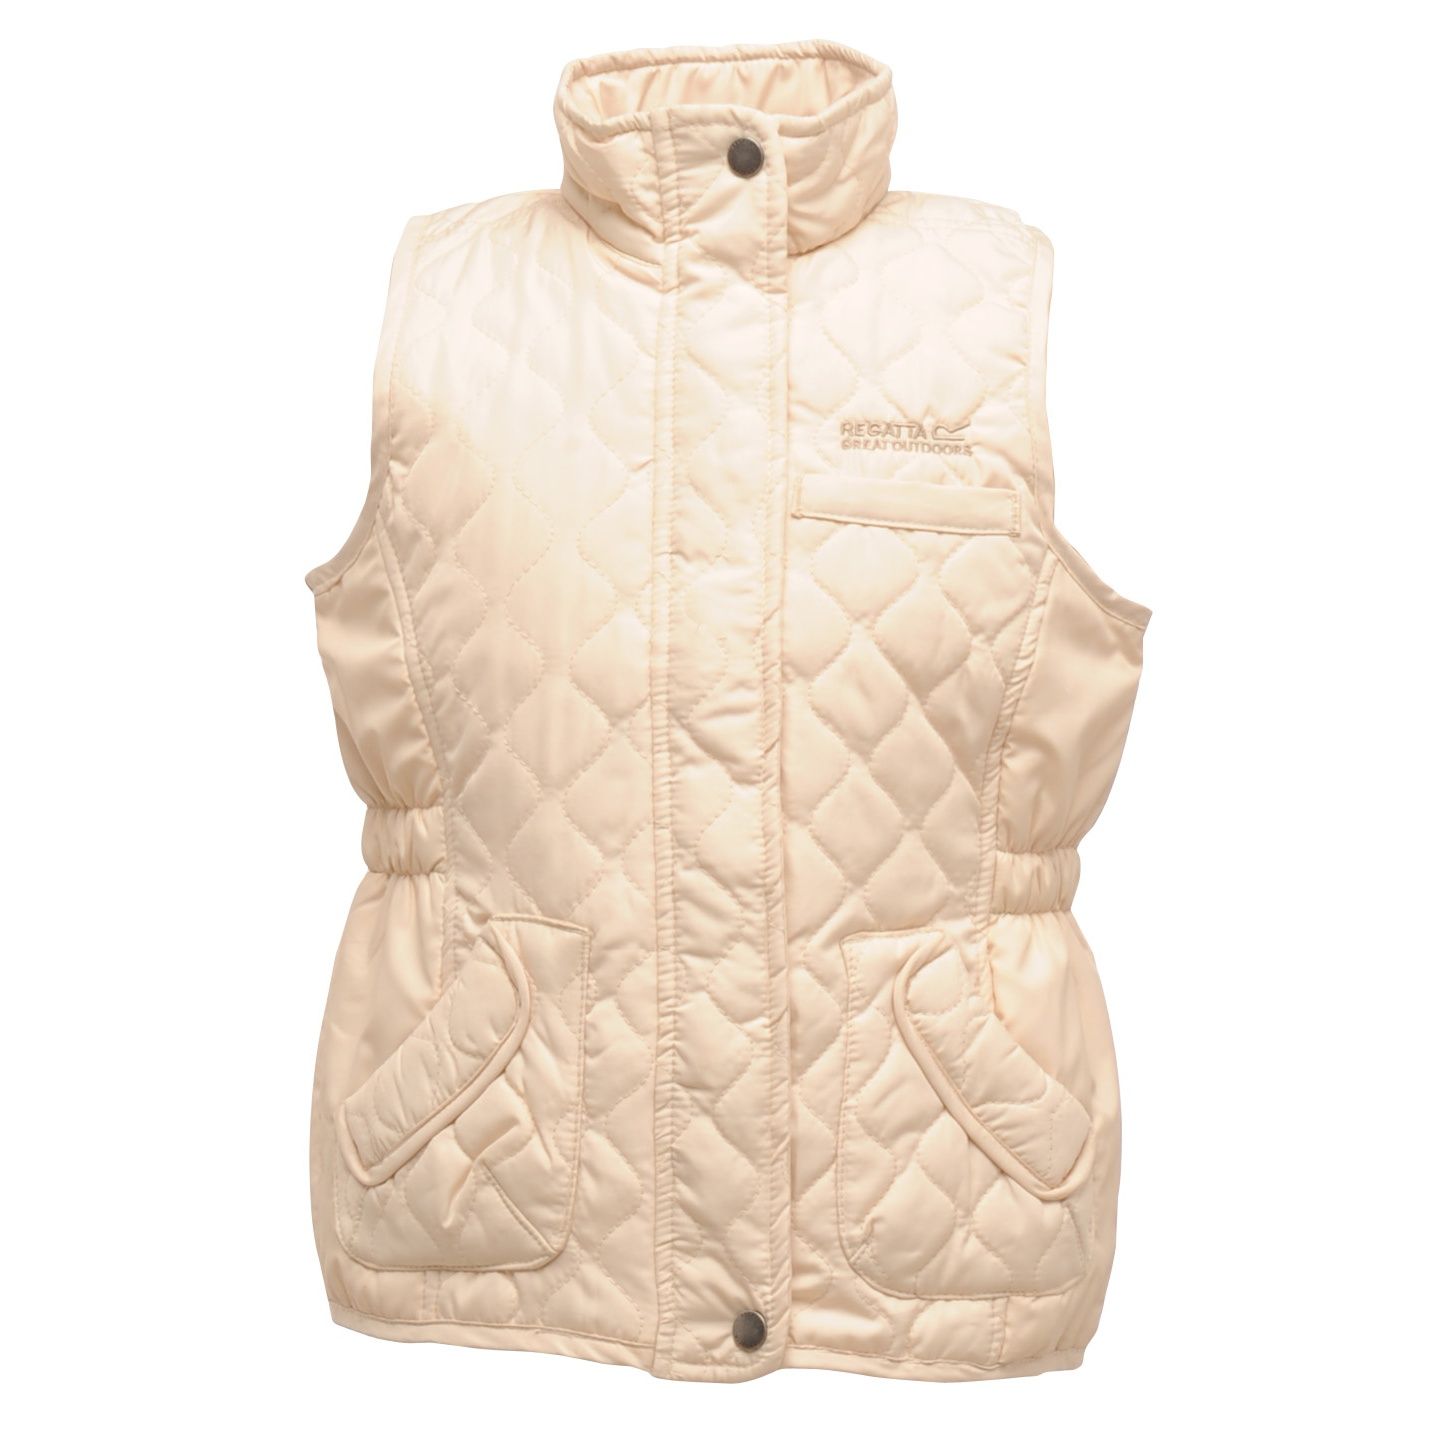 The Jookiba is our girls Heritage classic diamond quilt bodywarmer for the little lady about town. The soft-touch micro poplin is showerproof and is stuffed with cosy and warm Thermo Guard insulation. Metal poppers and a touch of elastic at the waist give girly flair. Slip it on over fleece sweaters or under jackets in the colder months. 100% Polyester. Regatta Kids Sizing (chest approx): 2 Years (53-55cm), 3-4 Years (55-57cm), 5-6 Years (59-61cm), 7-8 Years (63-67cm), 9-10 Years (69-73cm), 11-12 Years (75-79cm), 32